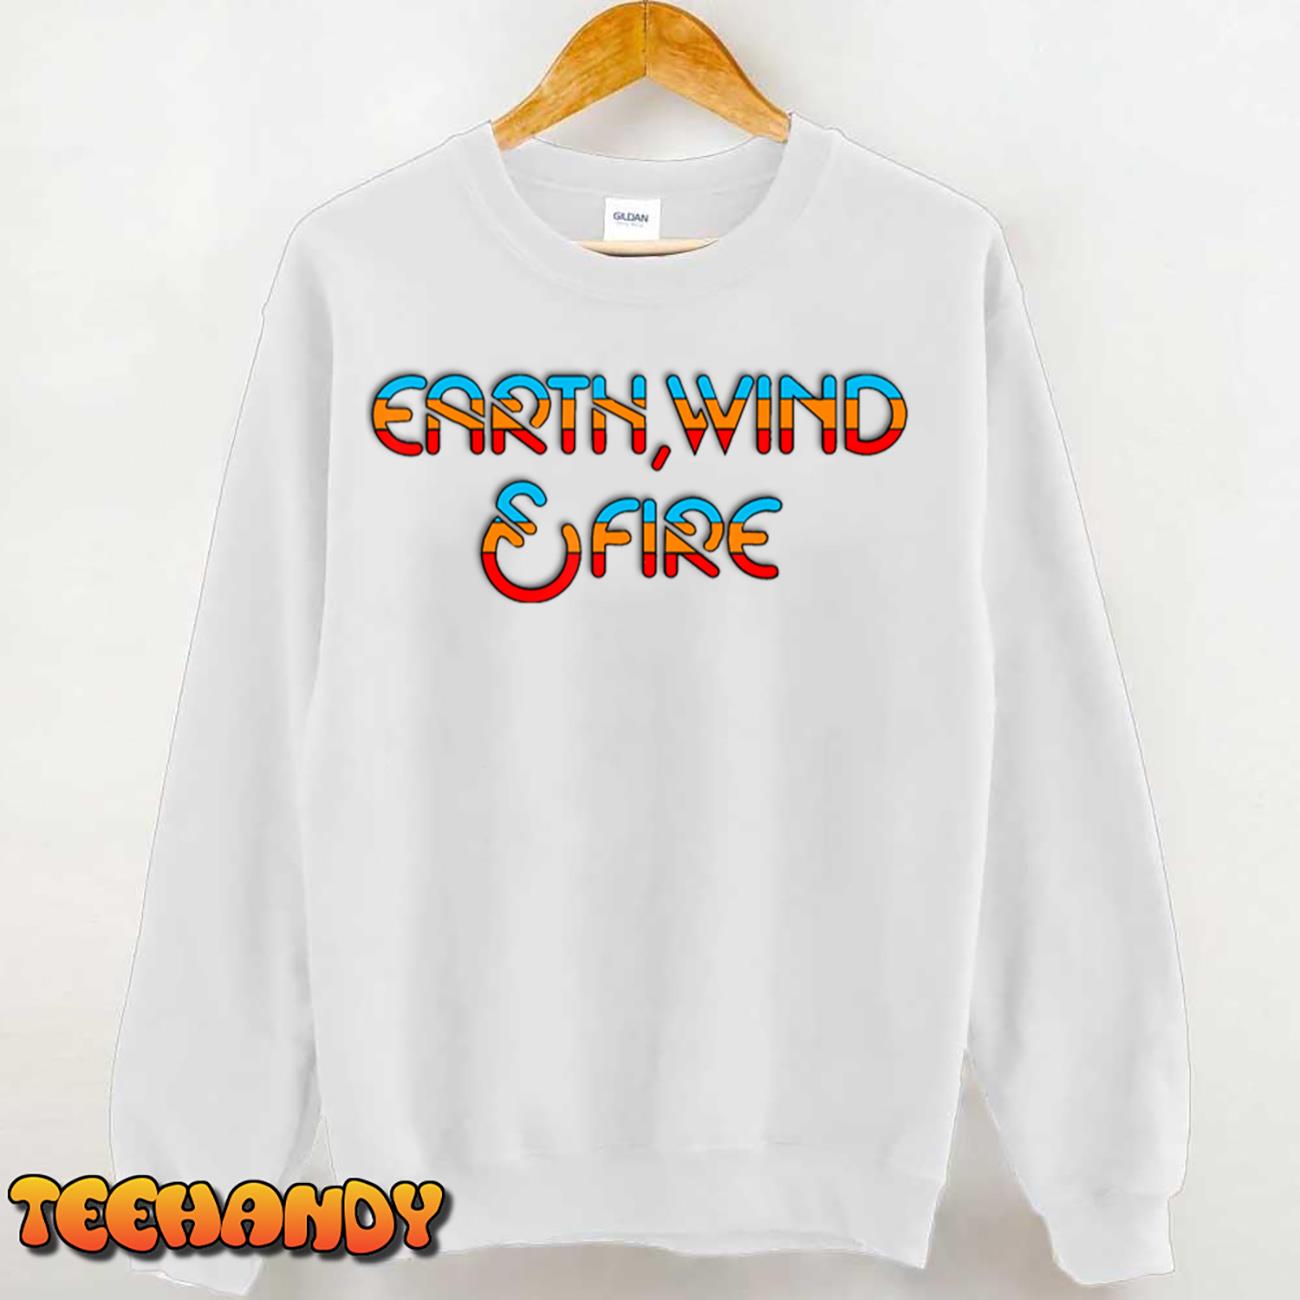 Earth Wind Fires Band T-Shirt